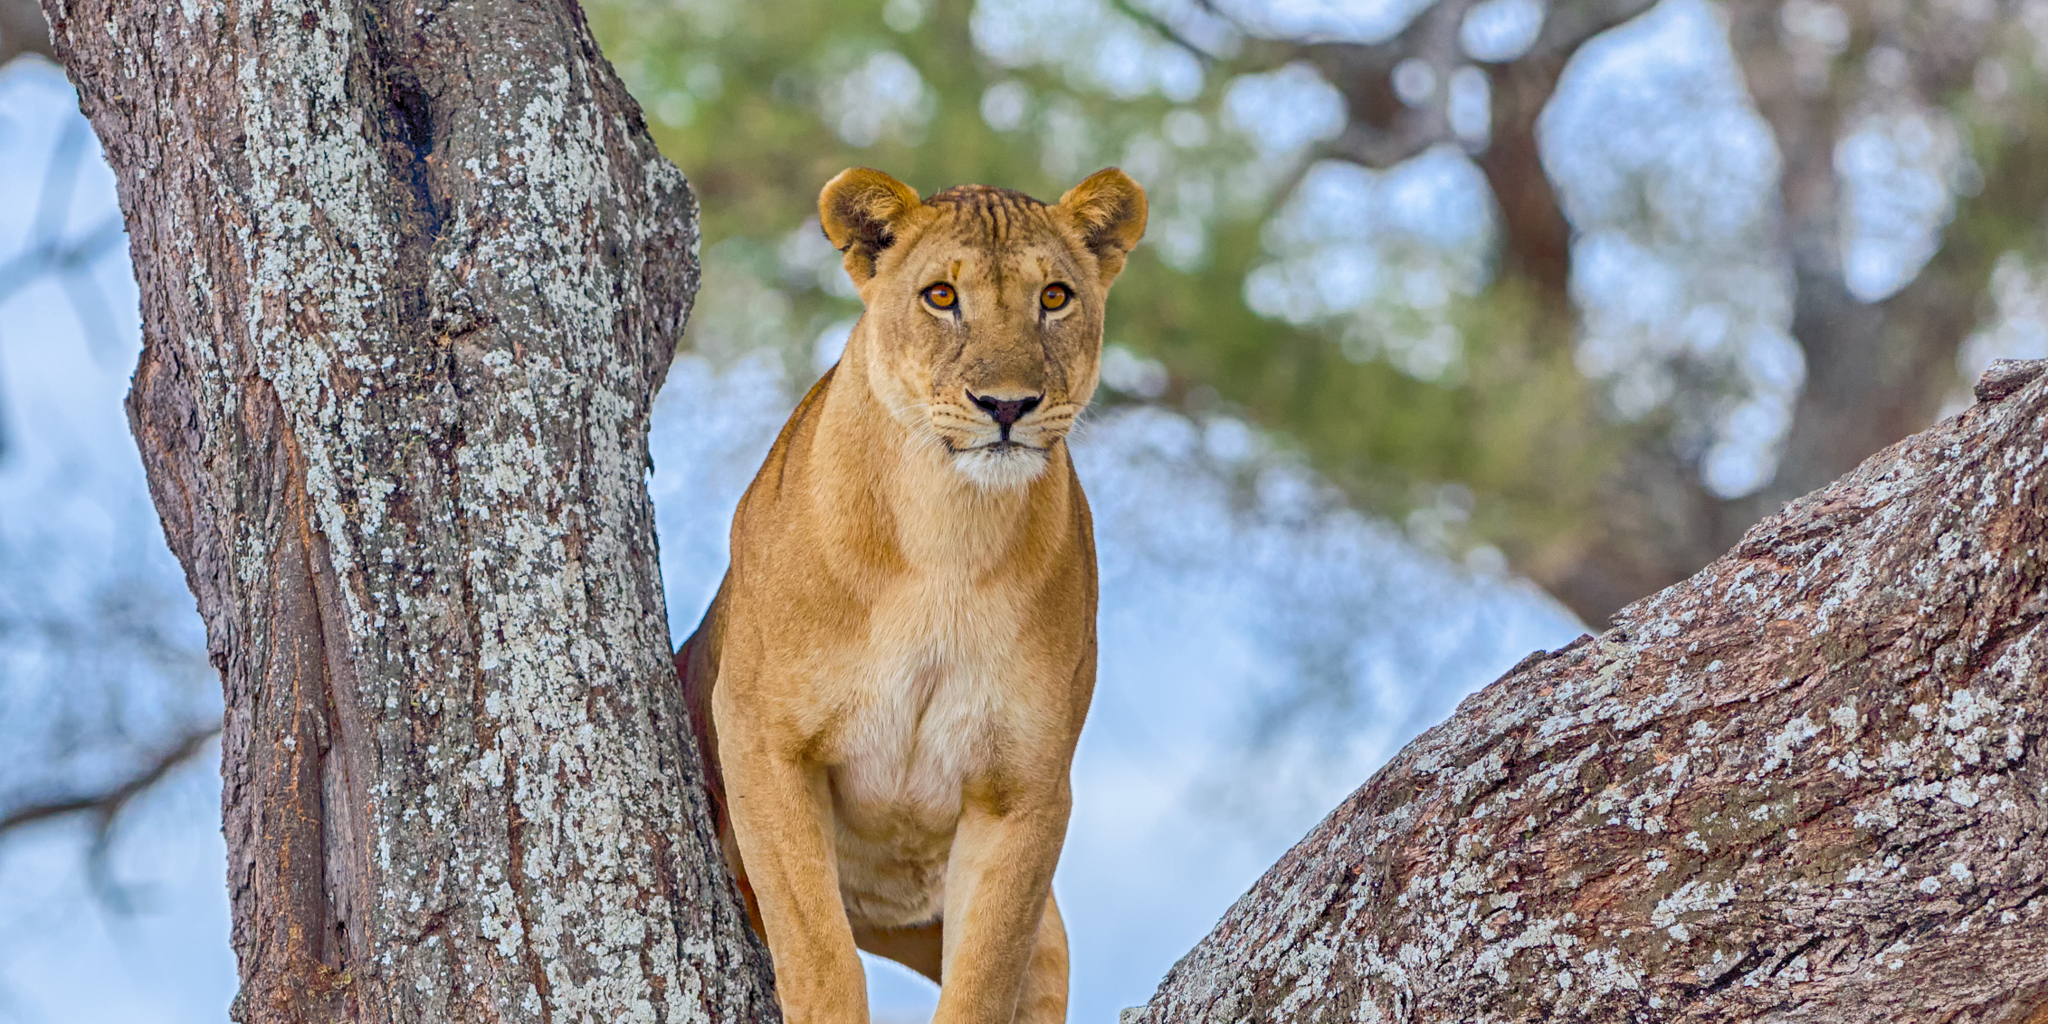 A female lion standing in the crook of a tree, Tarangire National Park